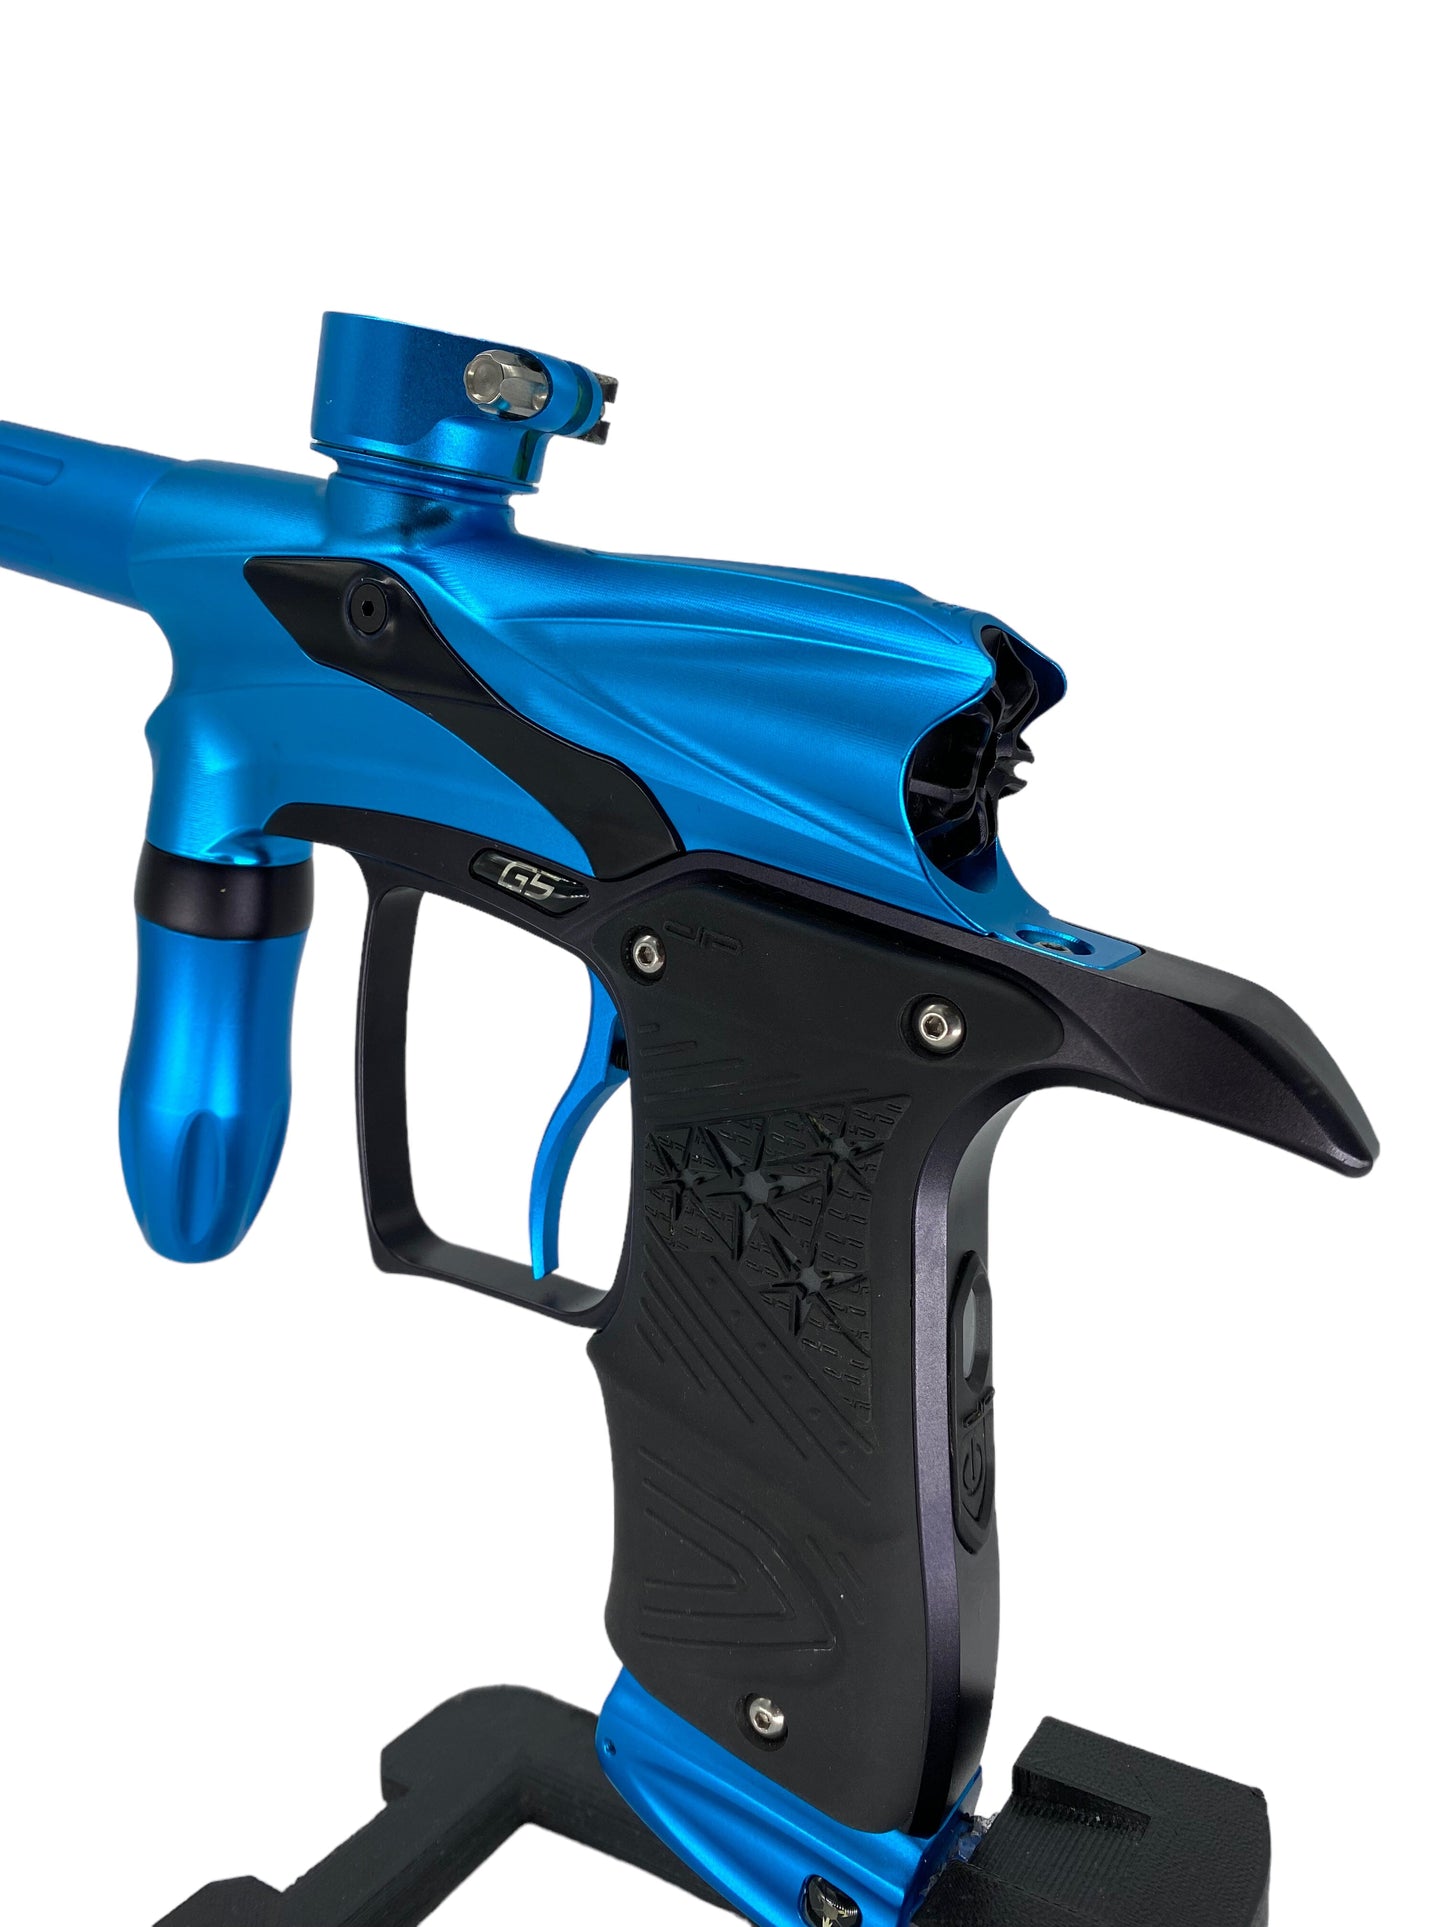 Used Dangerous Power G5 Paintball Gun from CPXBrosPaintball Buy/Sell/Trade Paintball Markers, Paintball Hoppers, Paintball Masks, and Hormesis Headbands